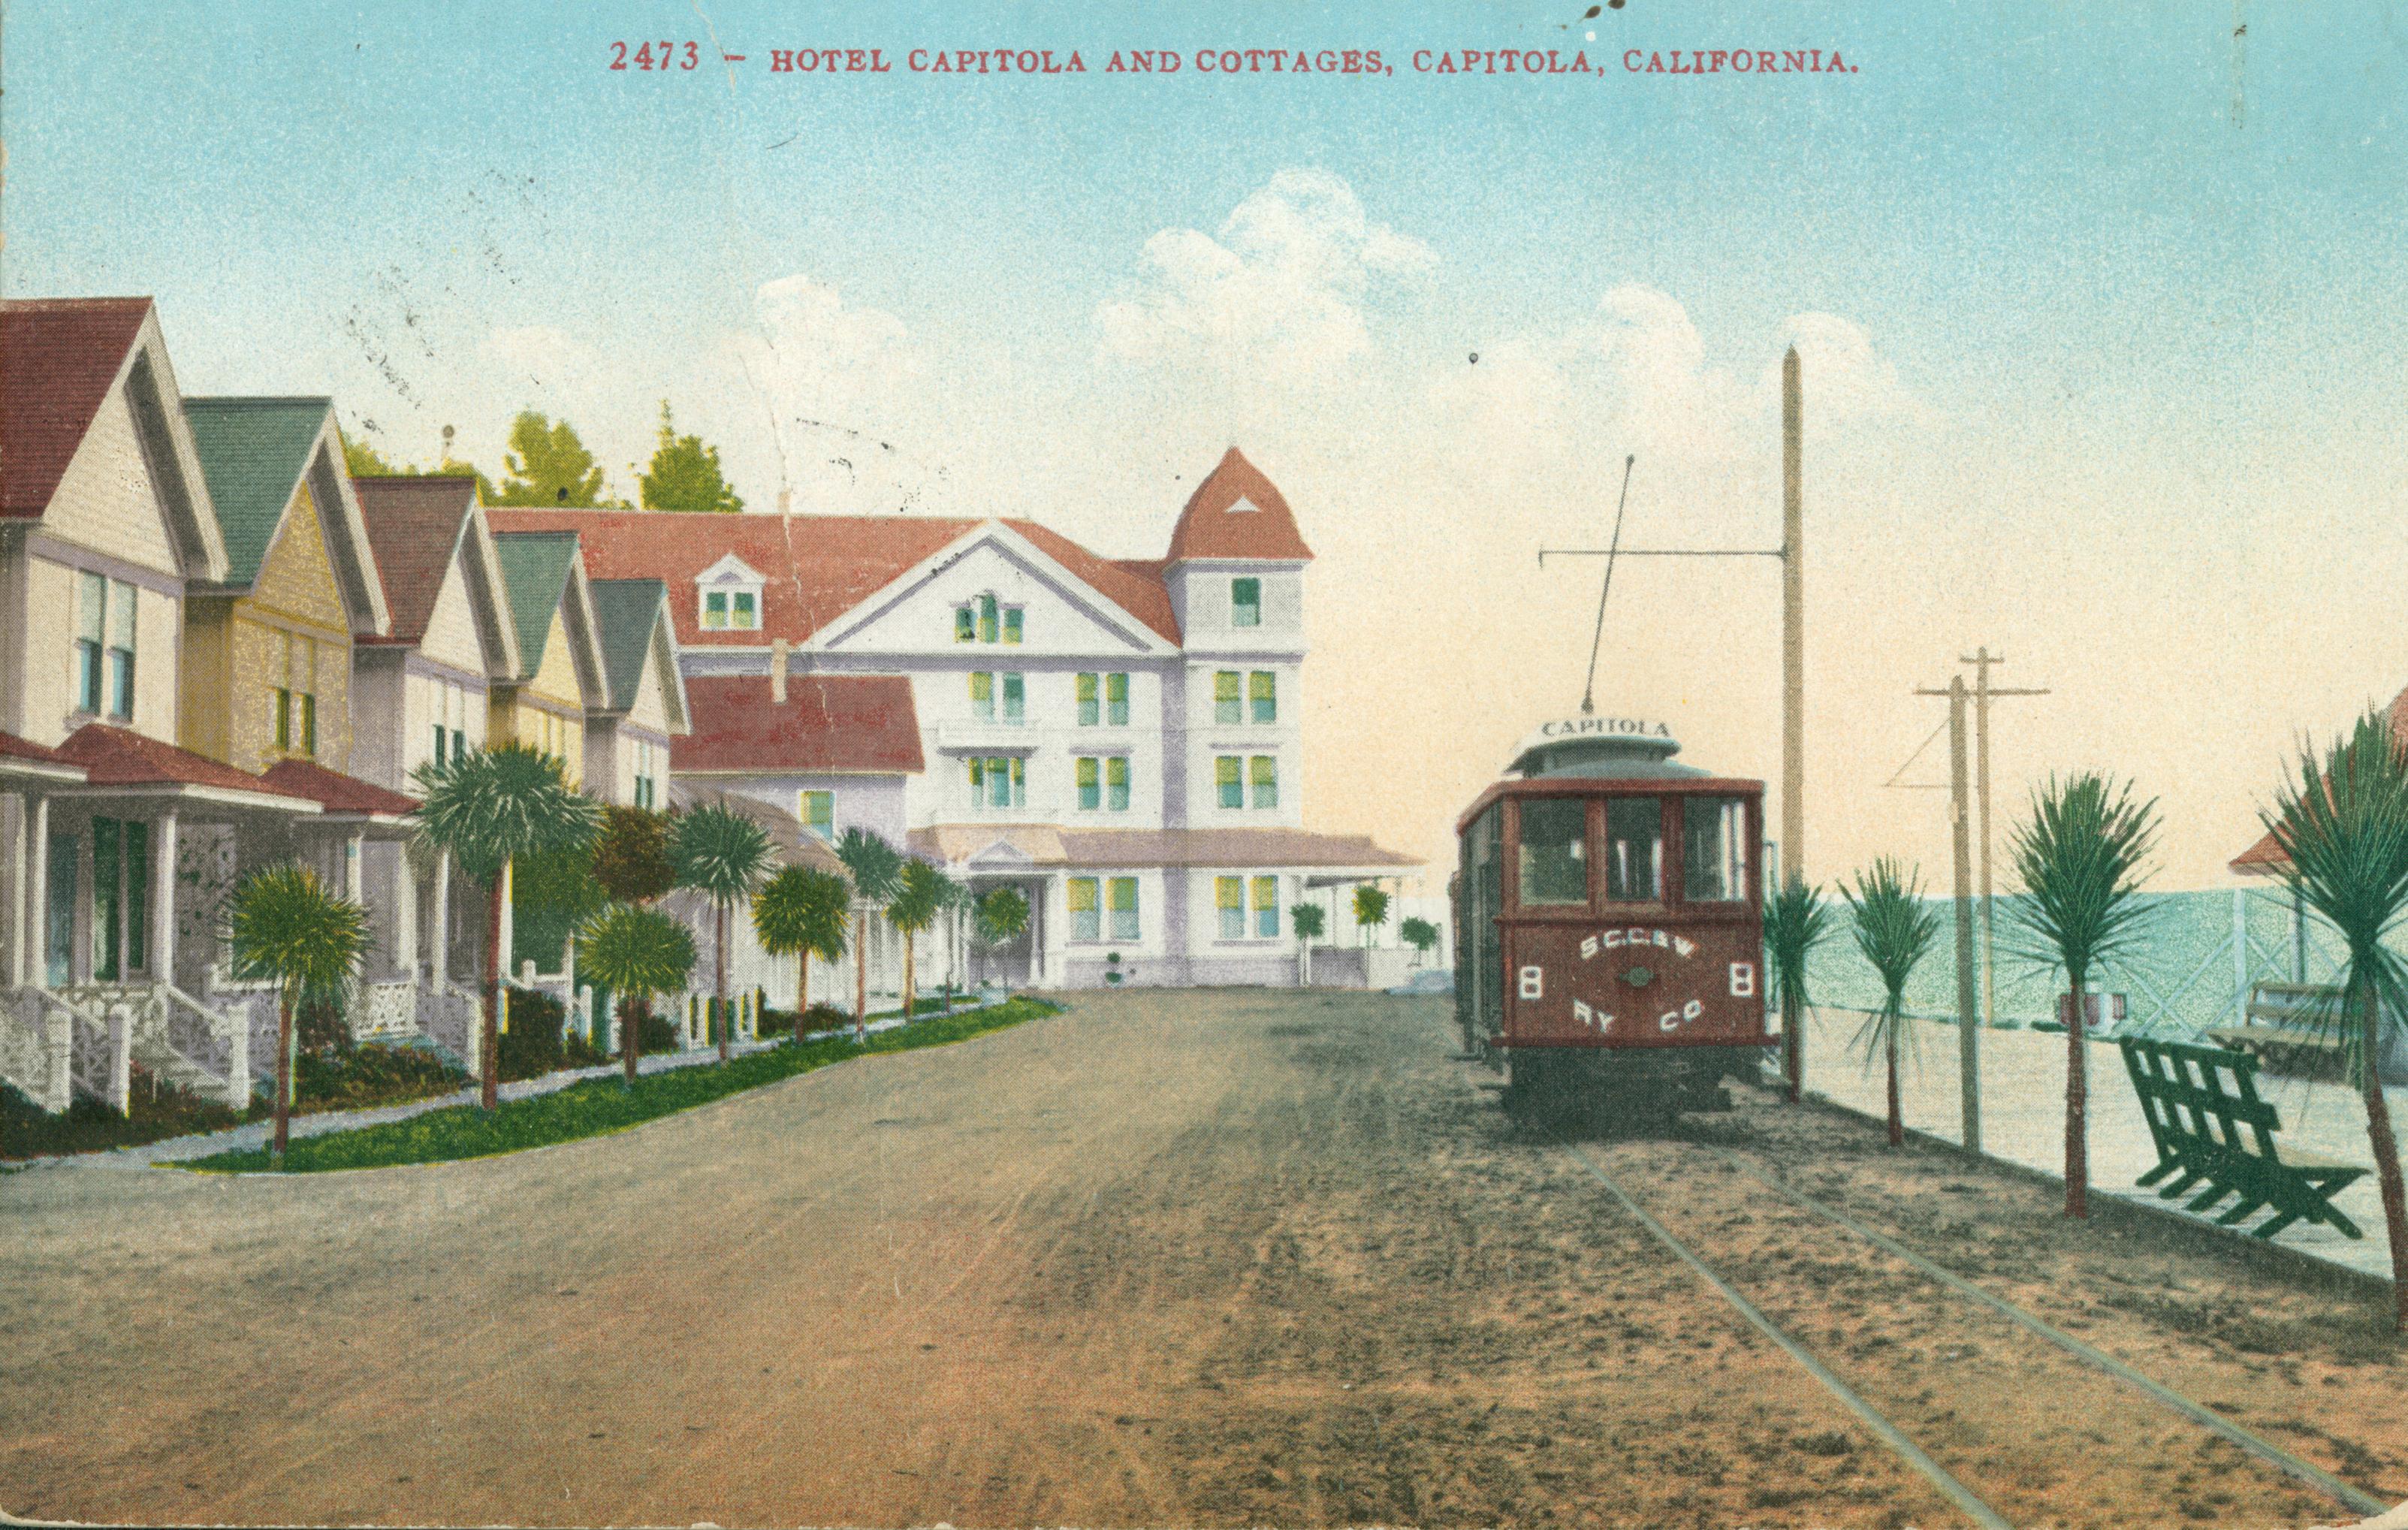 Exterior views of cottages and Hotel Capitola, dirt drive with electric trolley parallel to ocean front walk with benches and palm trees, ocean view